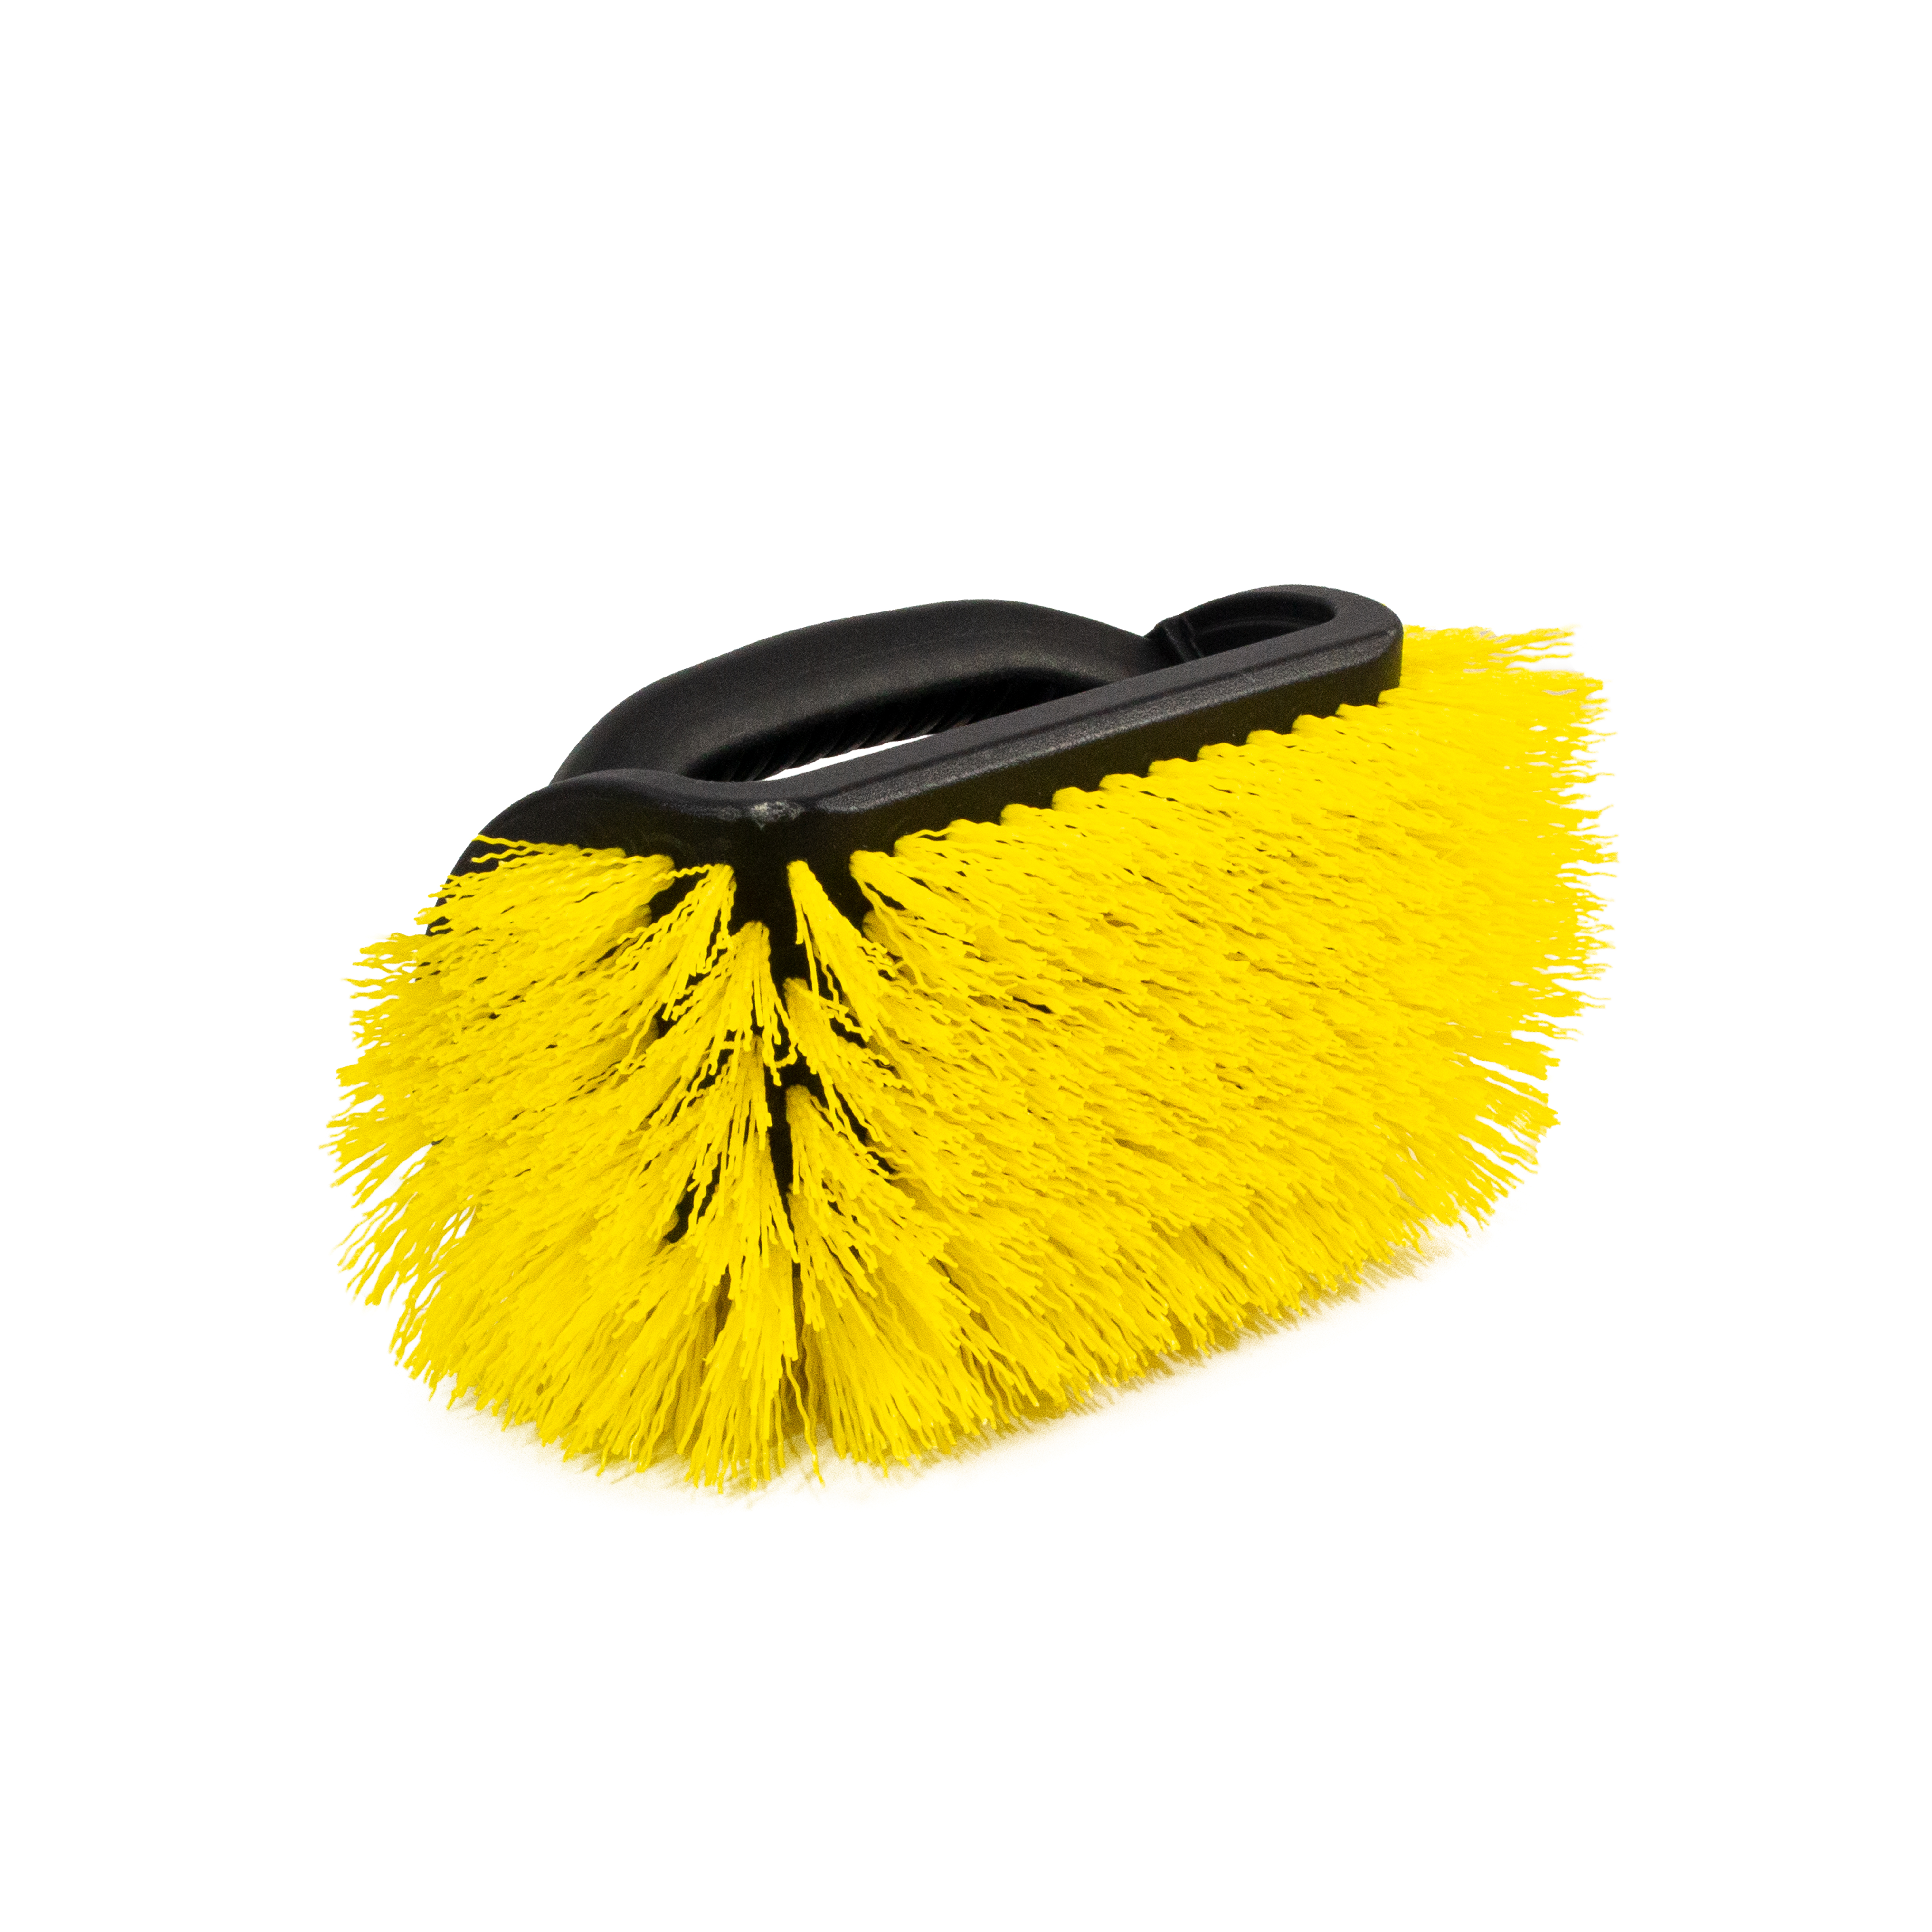 975840_UP_LKO_4-Sided Deck Brush_front 3